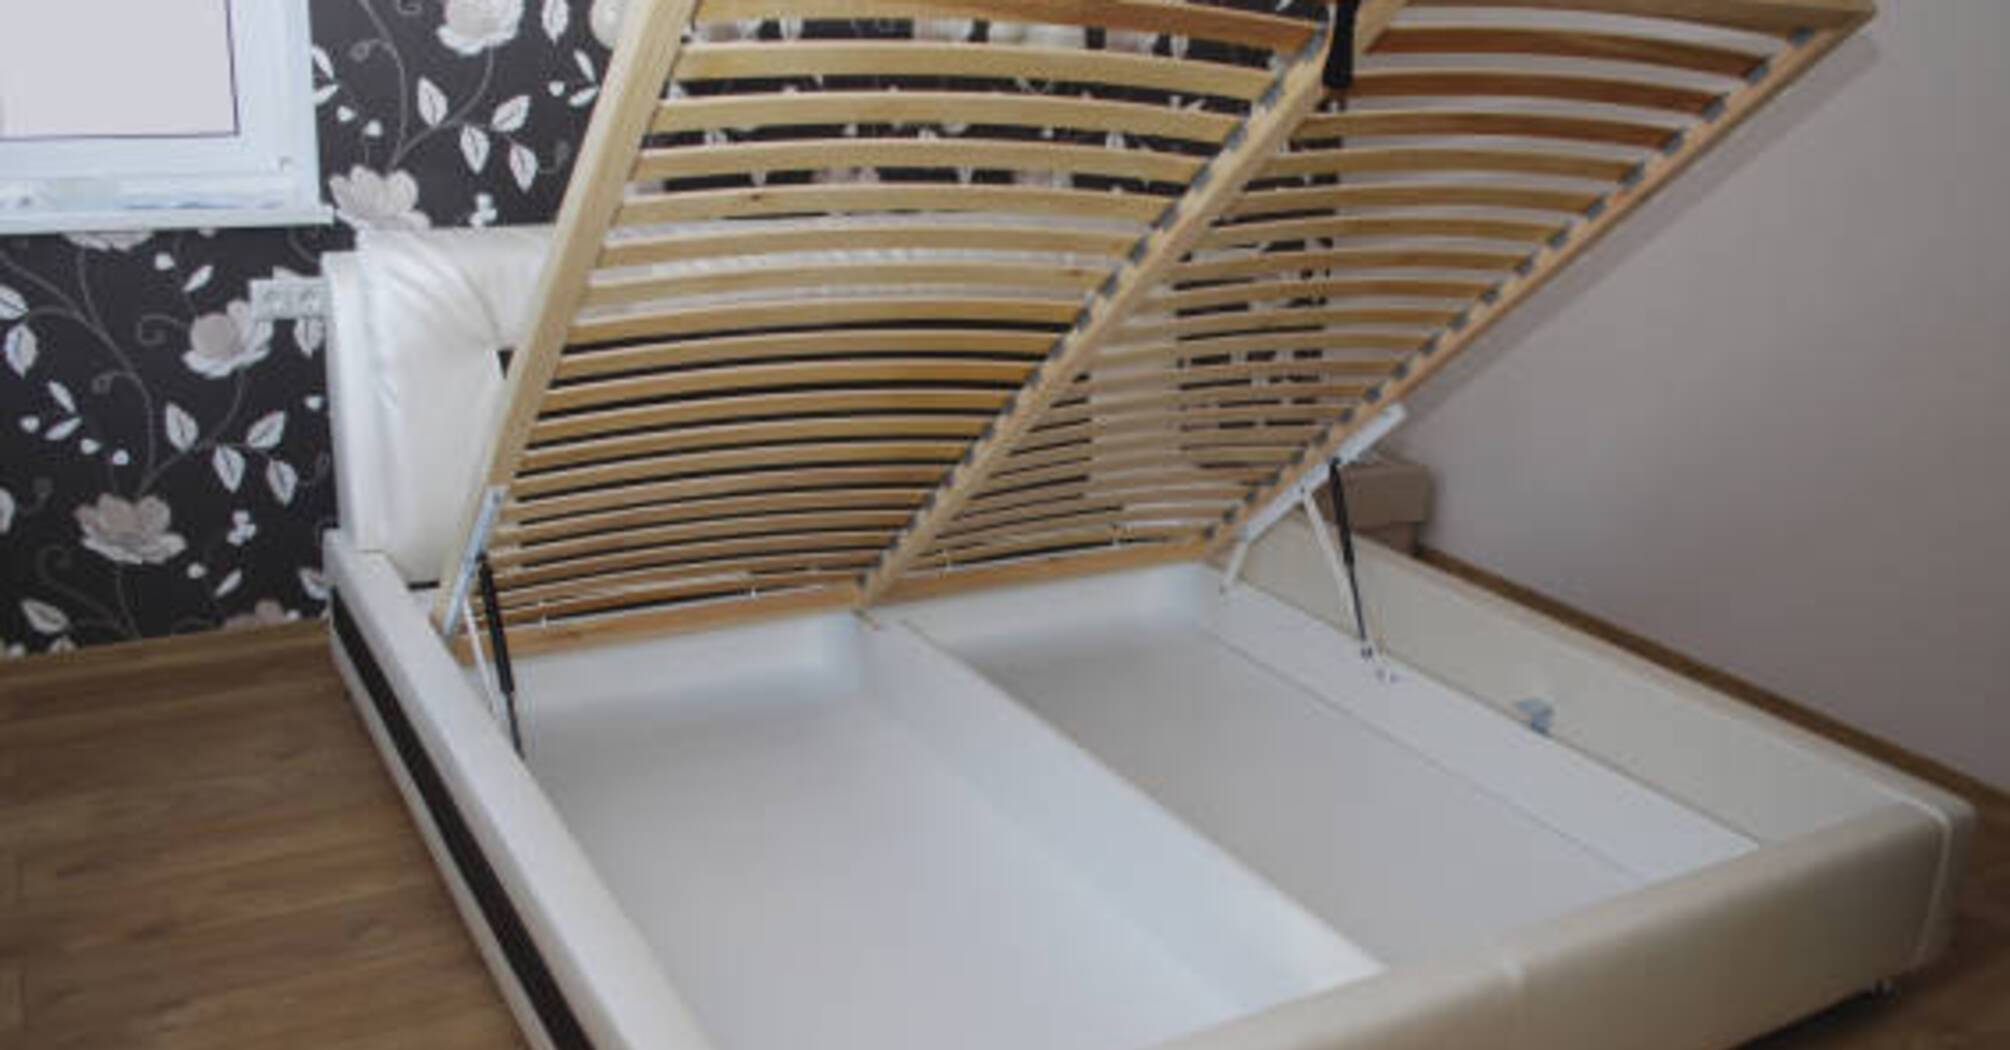 Should you buy a bed with a lift mechanism: it's not just about saving space